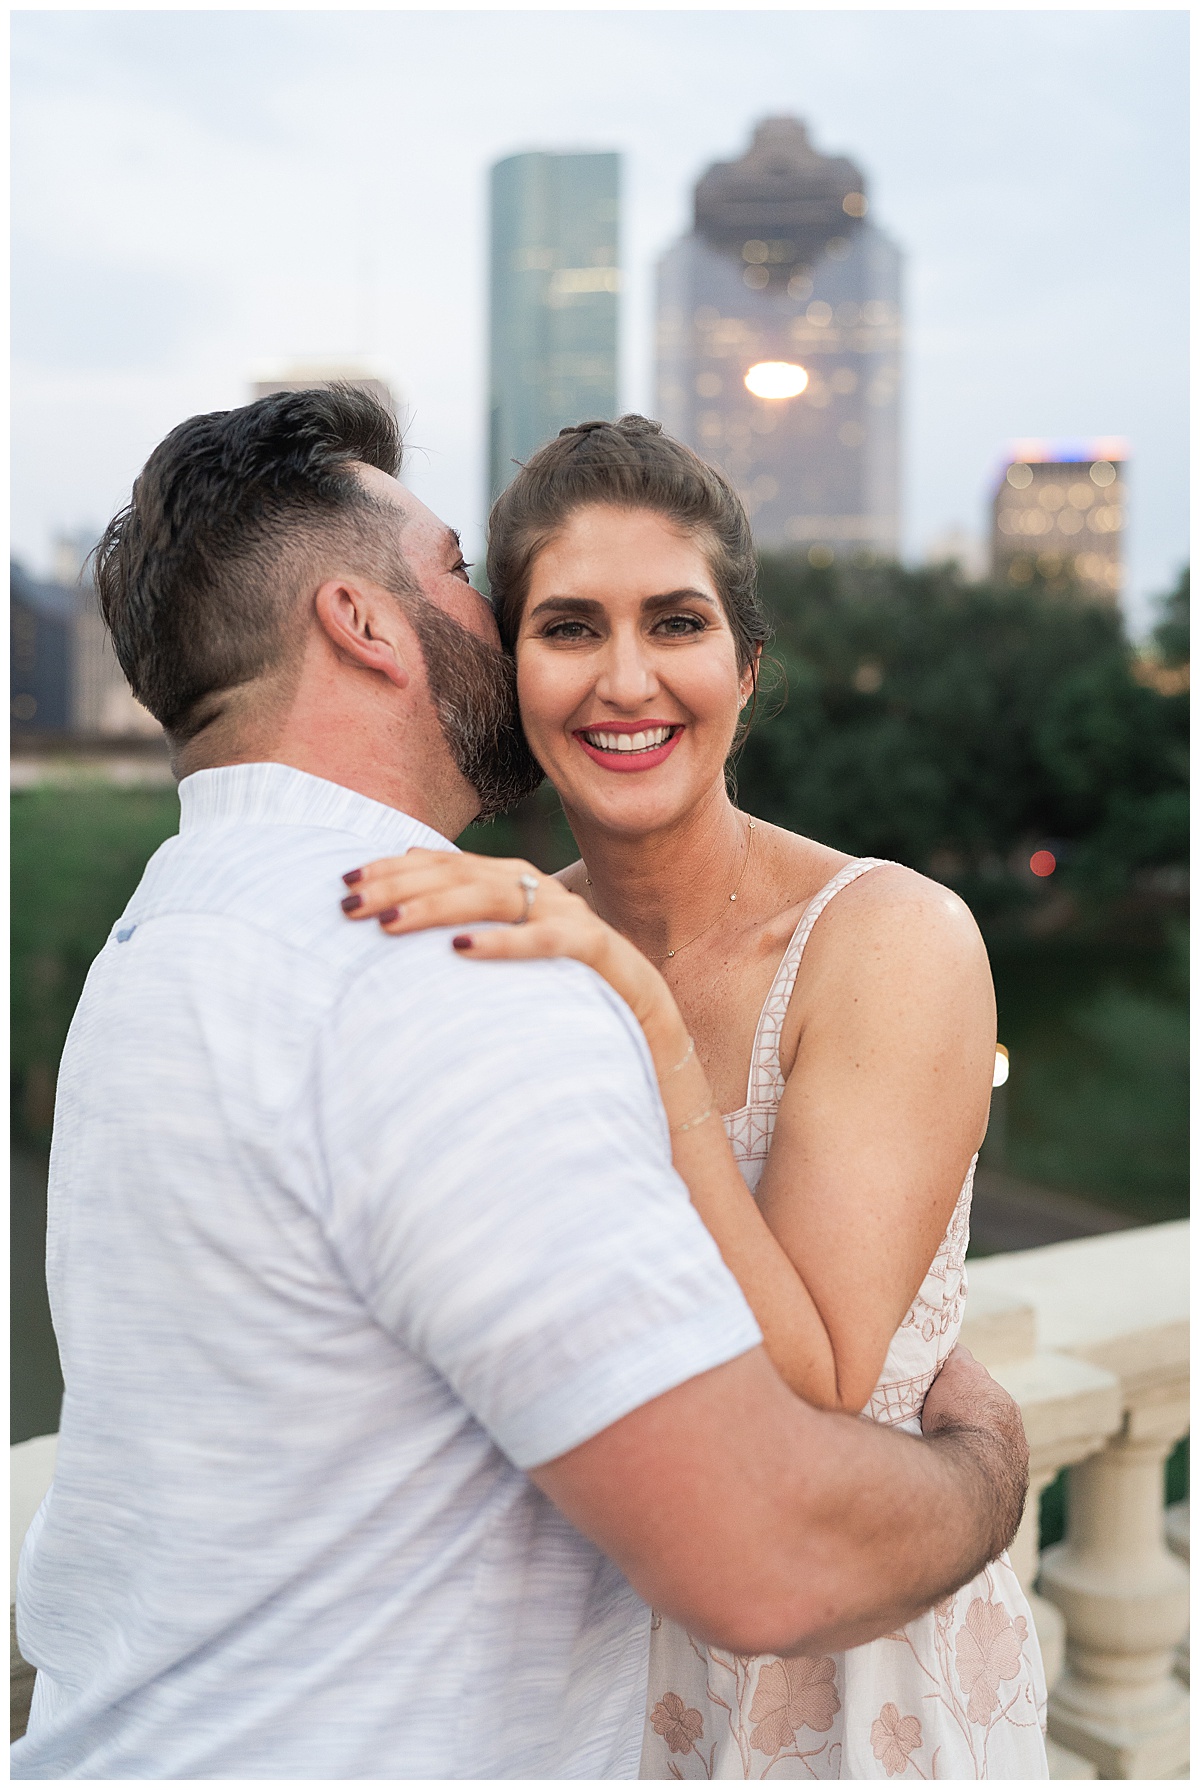 The woman shares a big smile for Houston’s Best Wedding Photographers